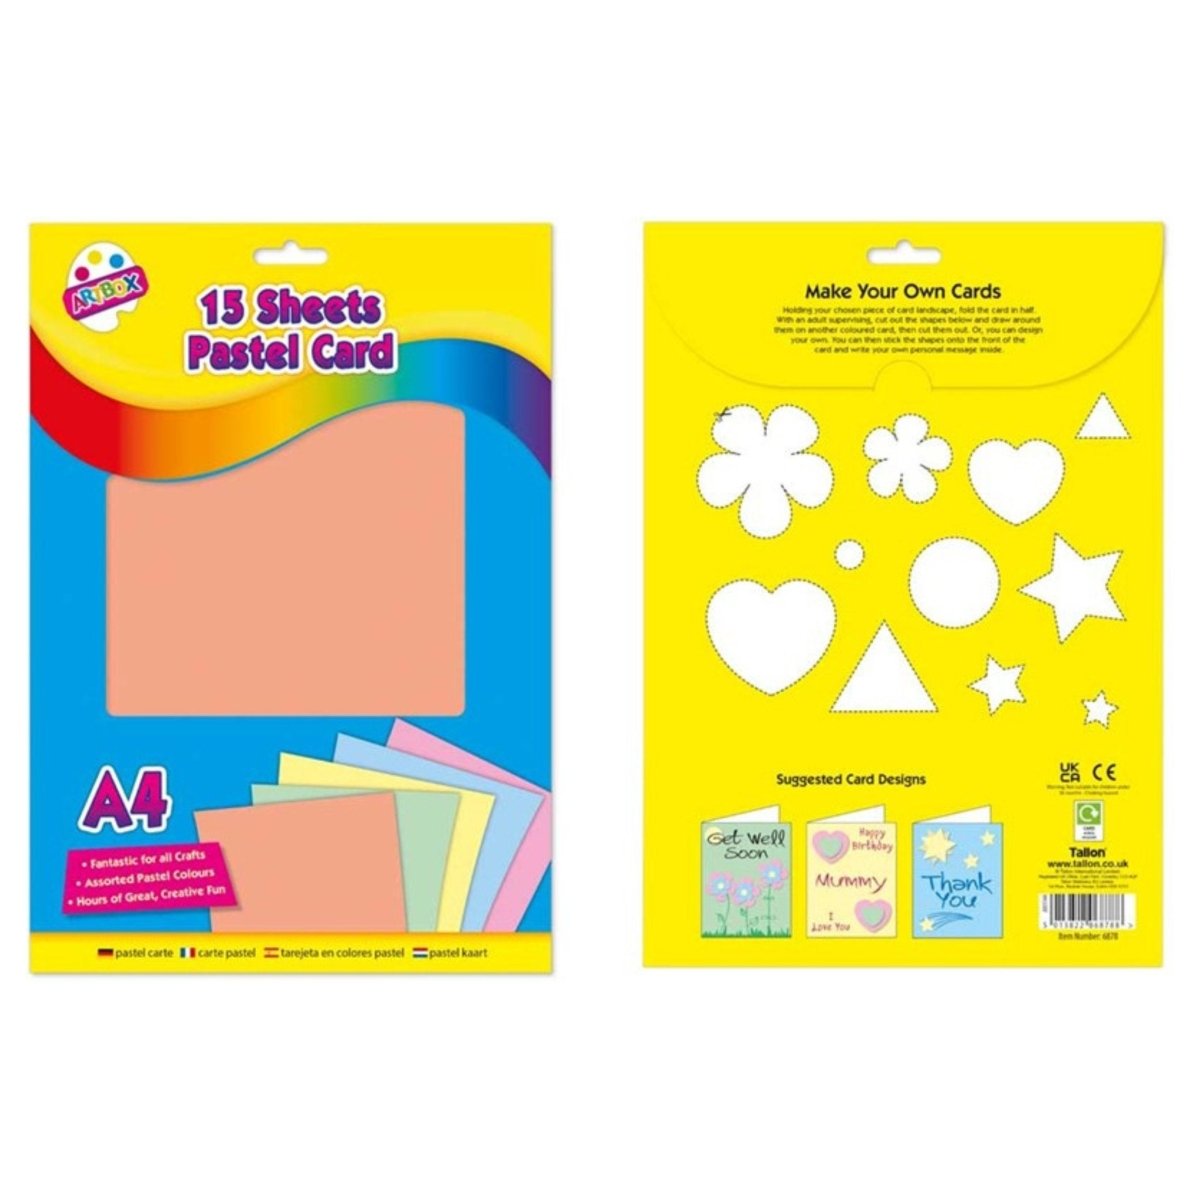 15 Sheets Pastel Card - Kids Party Craft